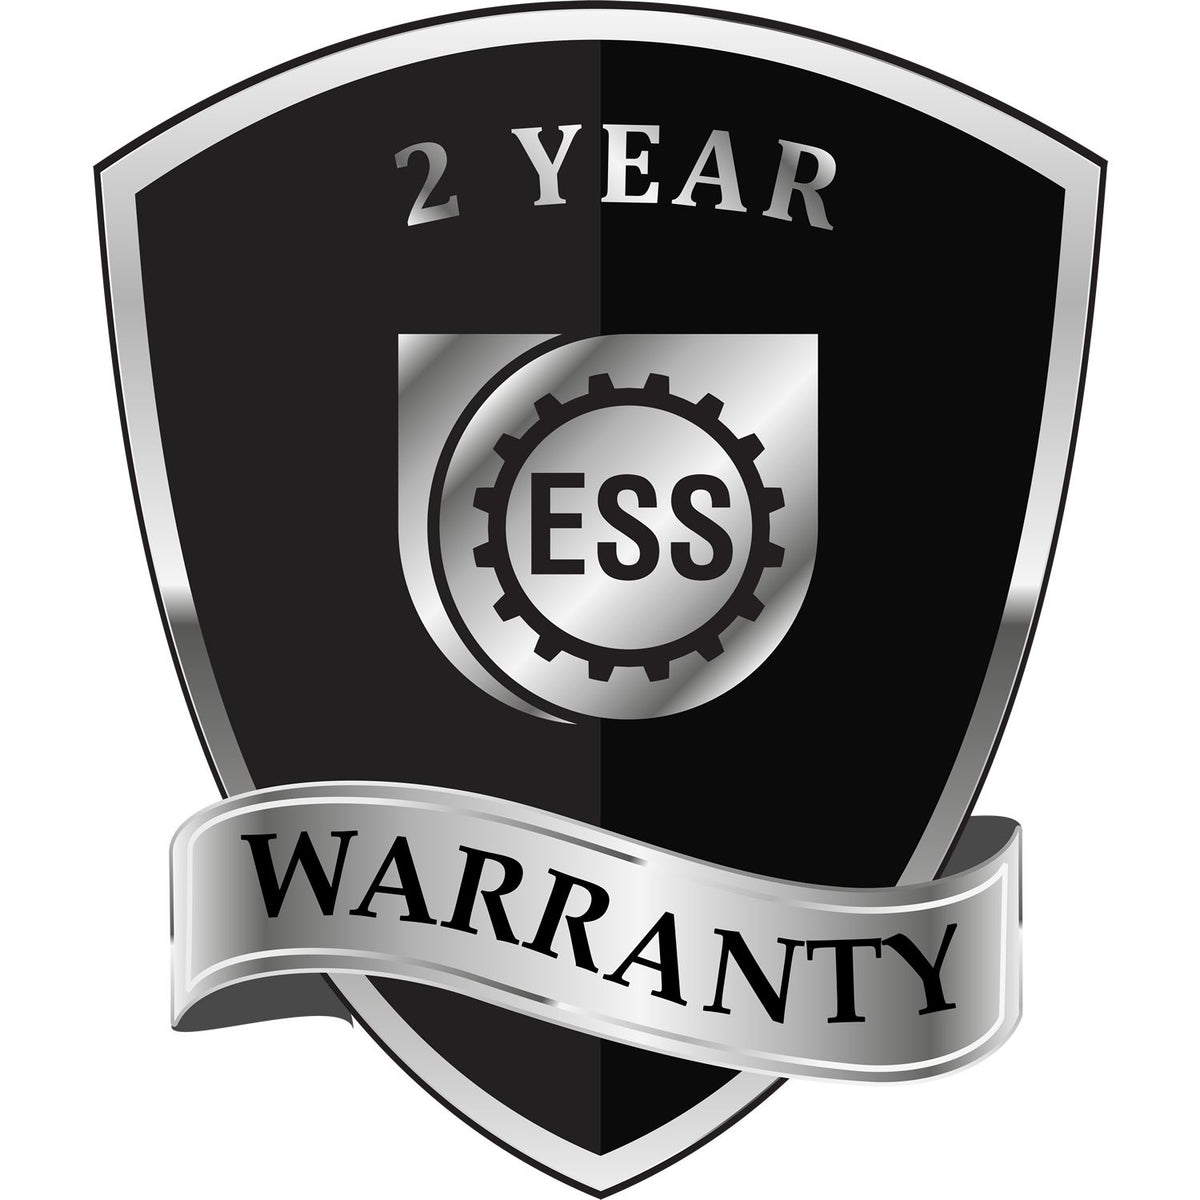 A black and silver badge or emblem showing warranty information for the Handheld Ohio Professional Geologist Embosser